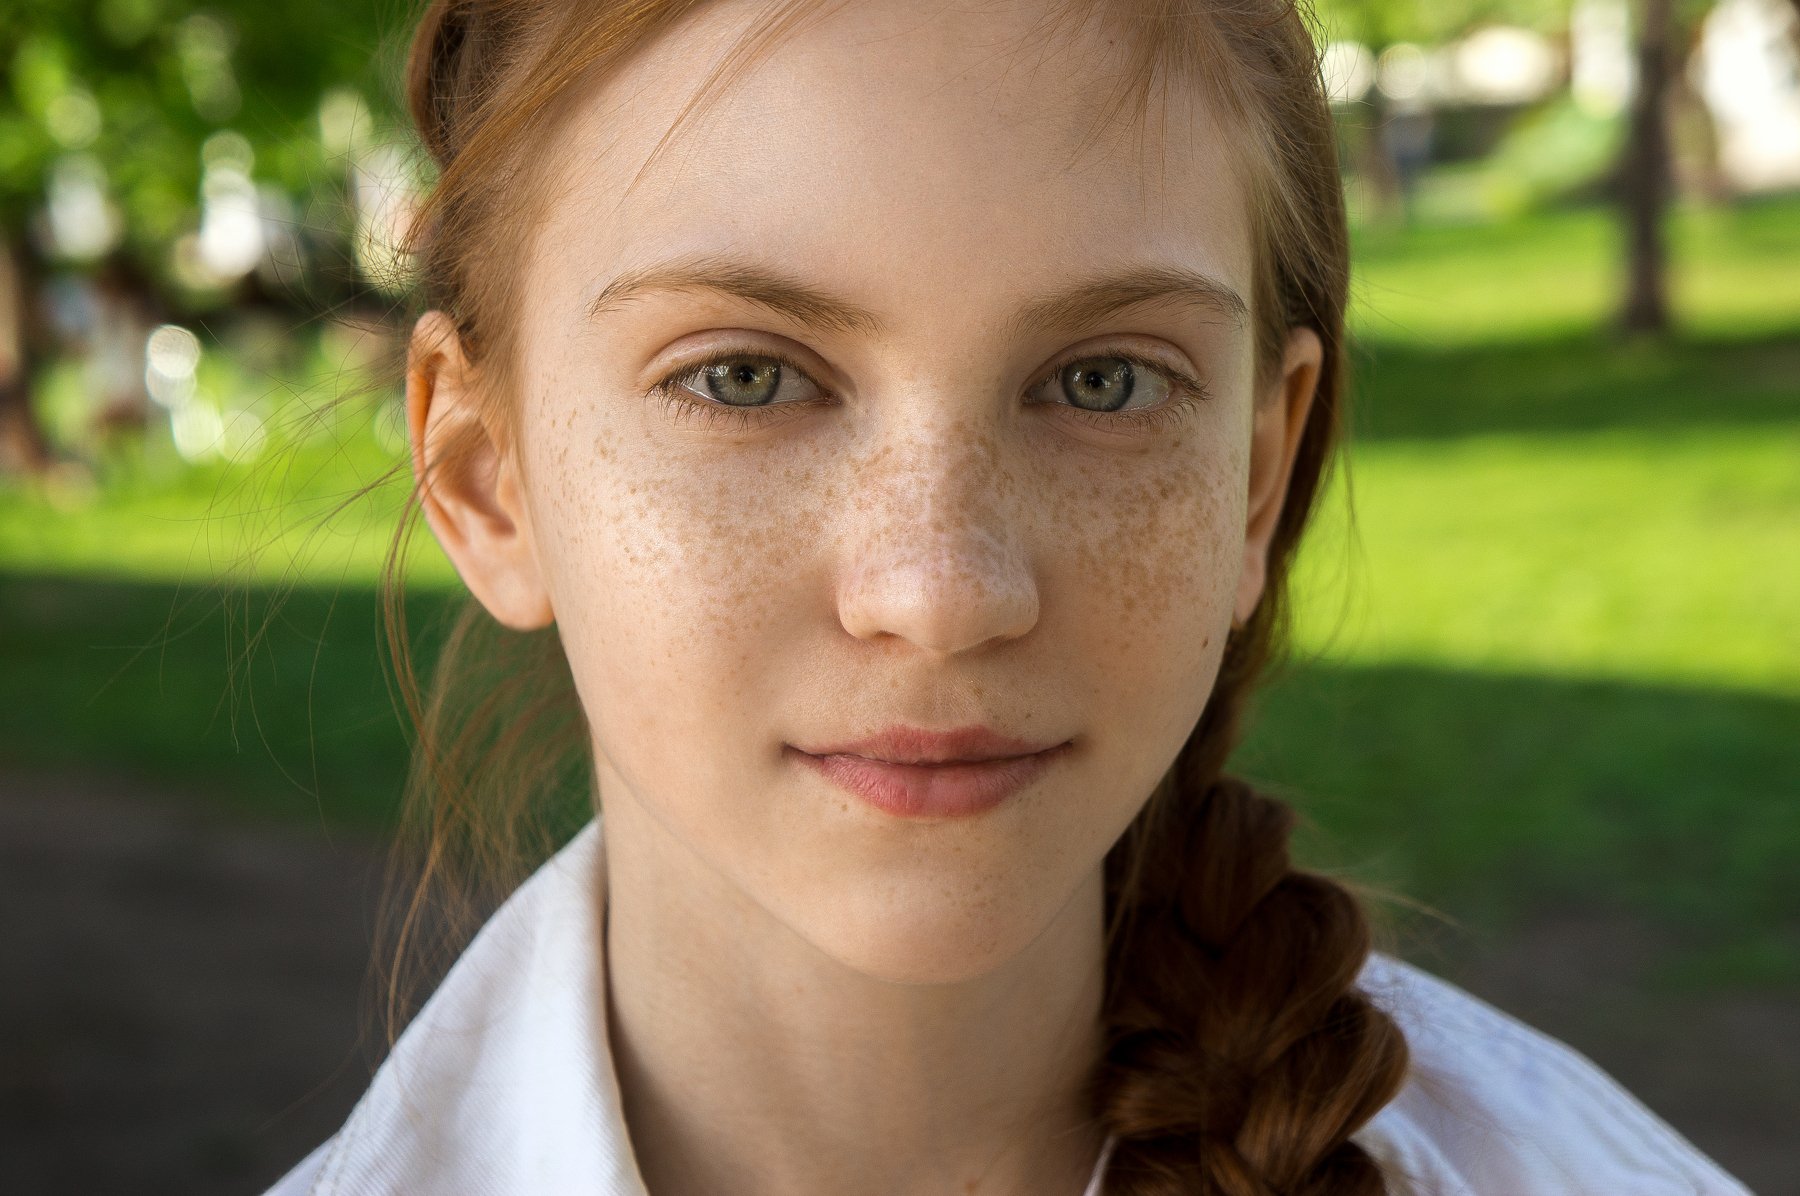 Innocent teen part. Tween Freckles. Наташа Янкелевич фотограф. Санни Блум. Flat chested Freckles.